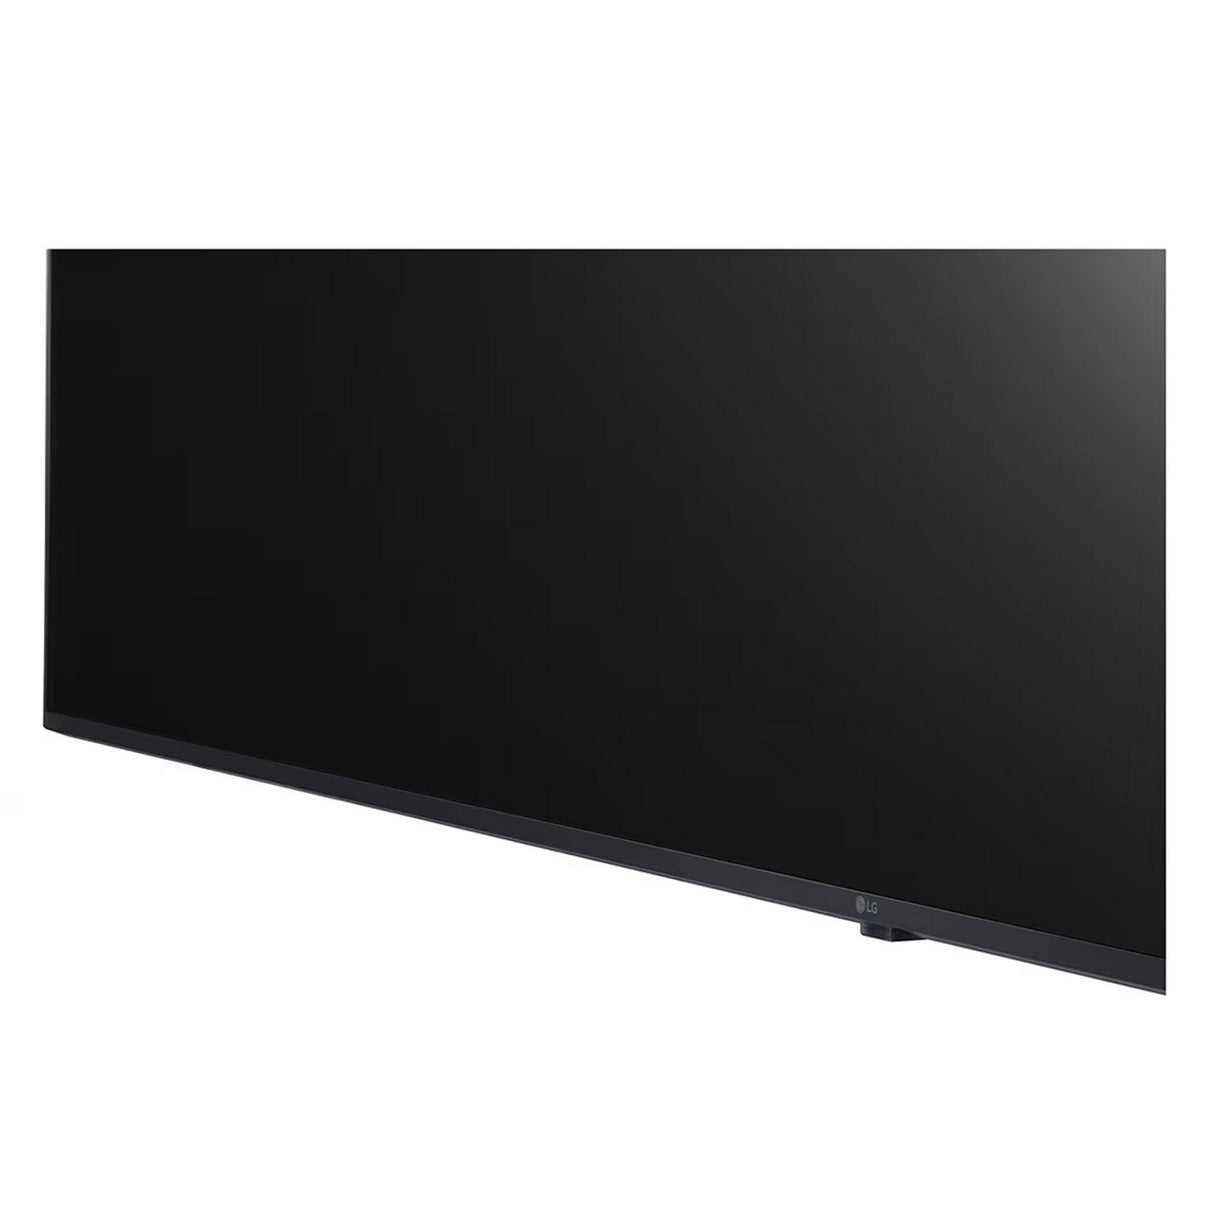 LG UL3J-E 75-Inch UHD Digital Signage with webOS 6.0 and Built-in Speakers